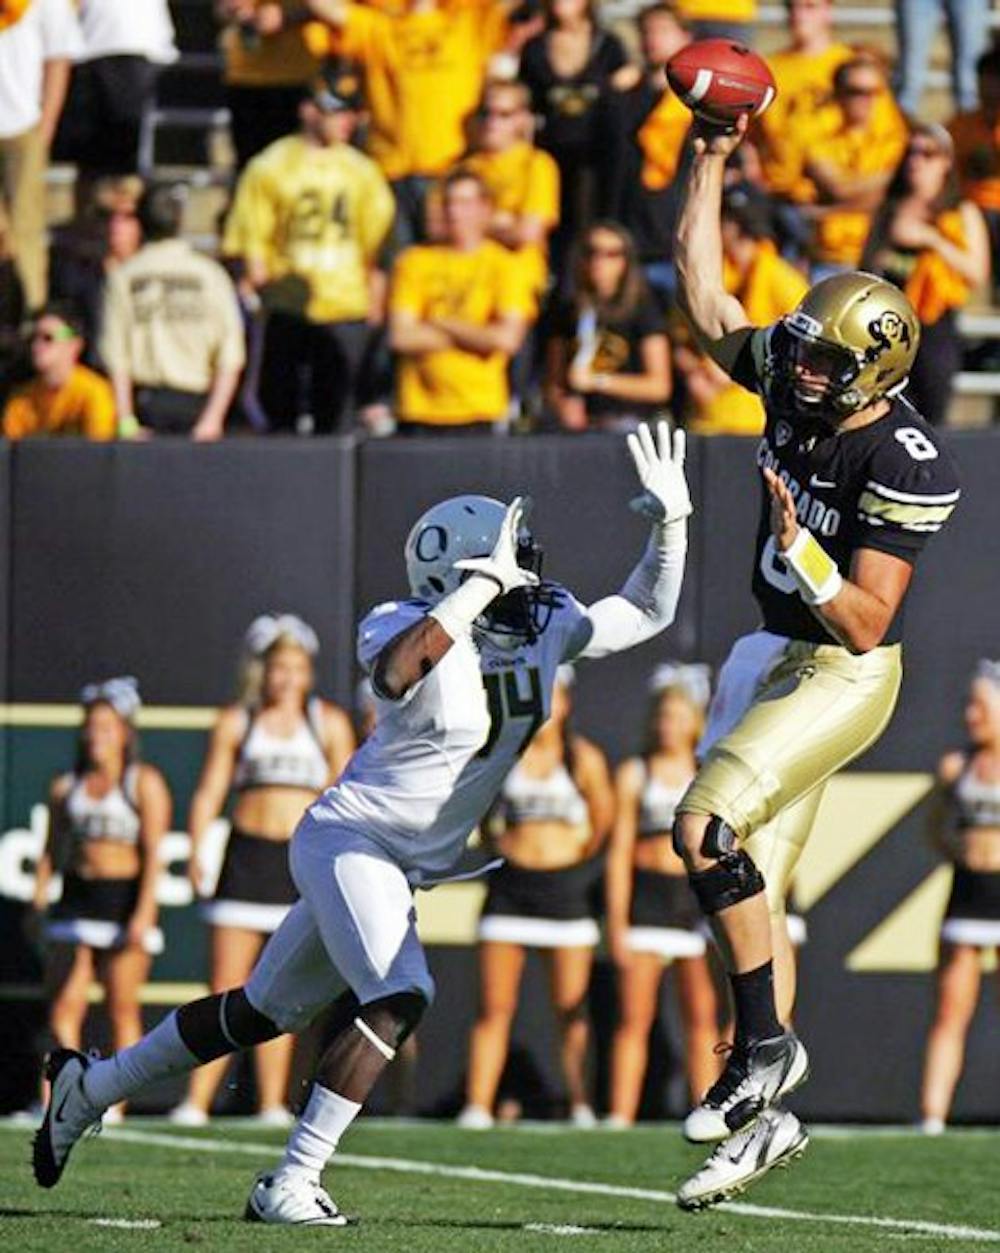 NOT QUITE SETTLED: Colorado Redshirt freshman quarterback Nick Hirschman gets pressured by Oregon cornerback Ifo Ekpre-Olomu during the Buffaloes’ 45-2 loss to the Ducks. The Buffaloes are looking for their first Pac-12 conference win against the Sun Devils on Saturday. (Photo courtesy of CU Independent | James Bradbury)